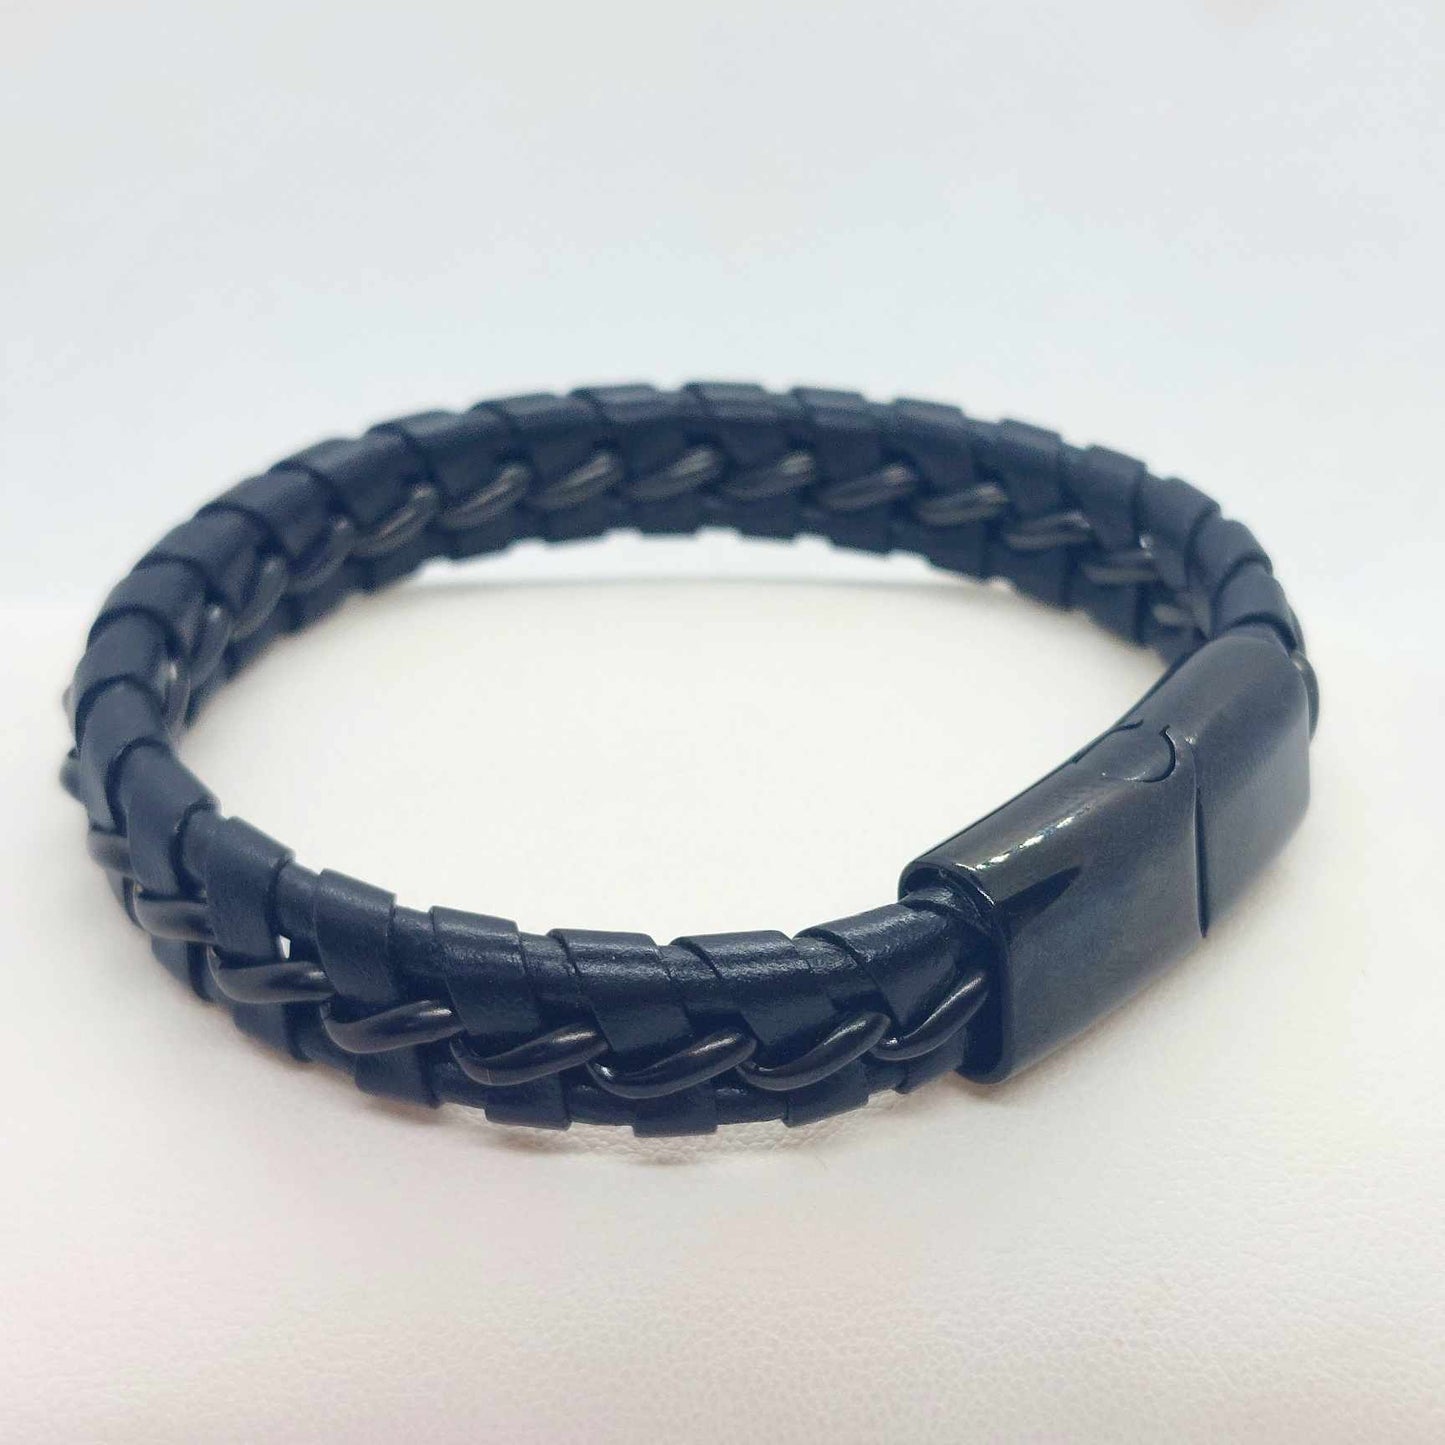 Black Braided Leather and Stainless Steel with Lava Bead Bracelet for Men